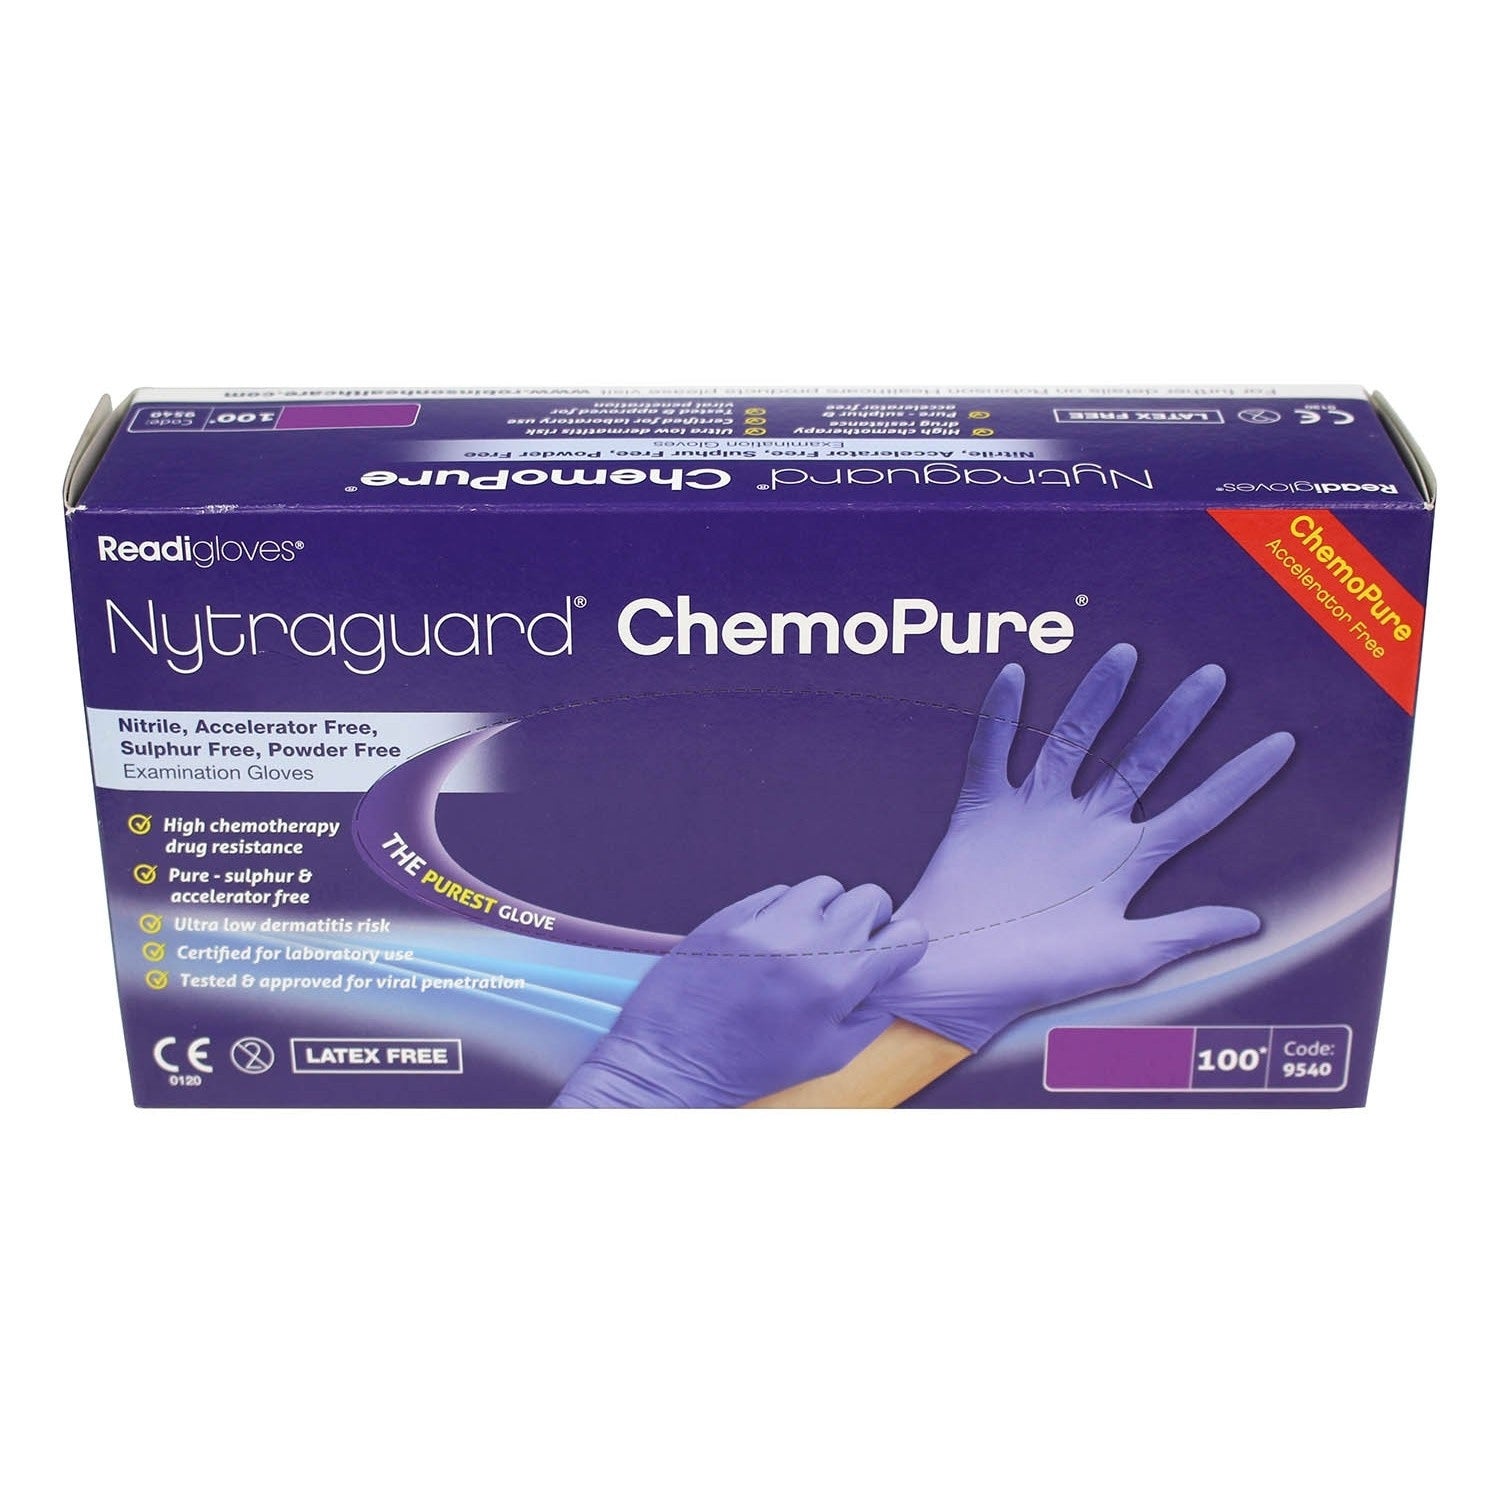 Nytraguard Chemopure Gloves | Nitrile | Powder Free | Purple | Large | Pack of 100 Pieces (3)